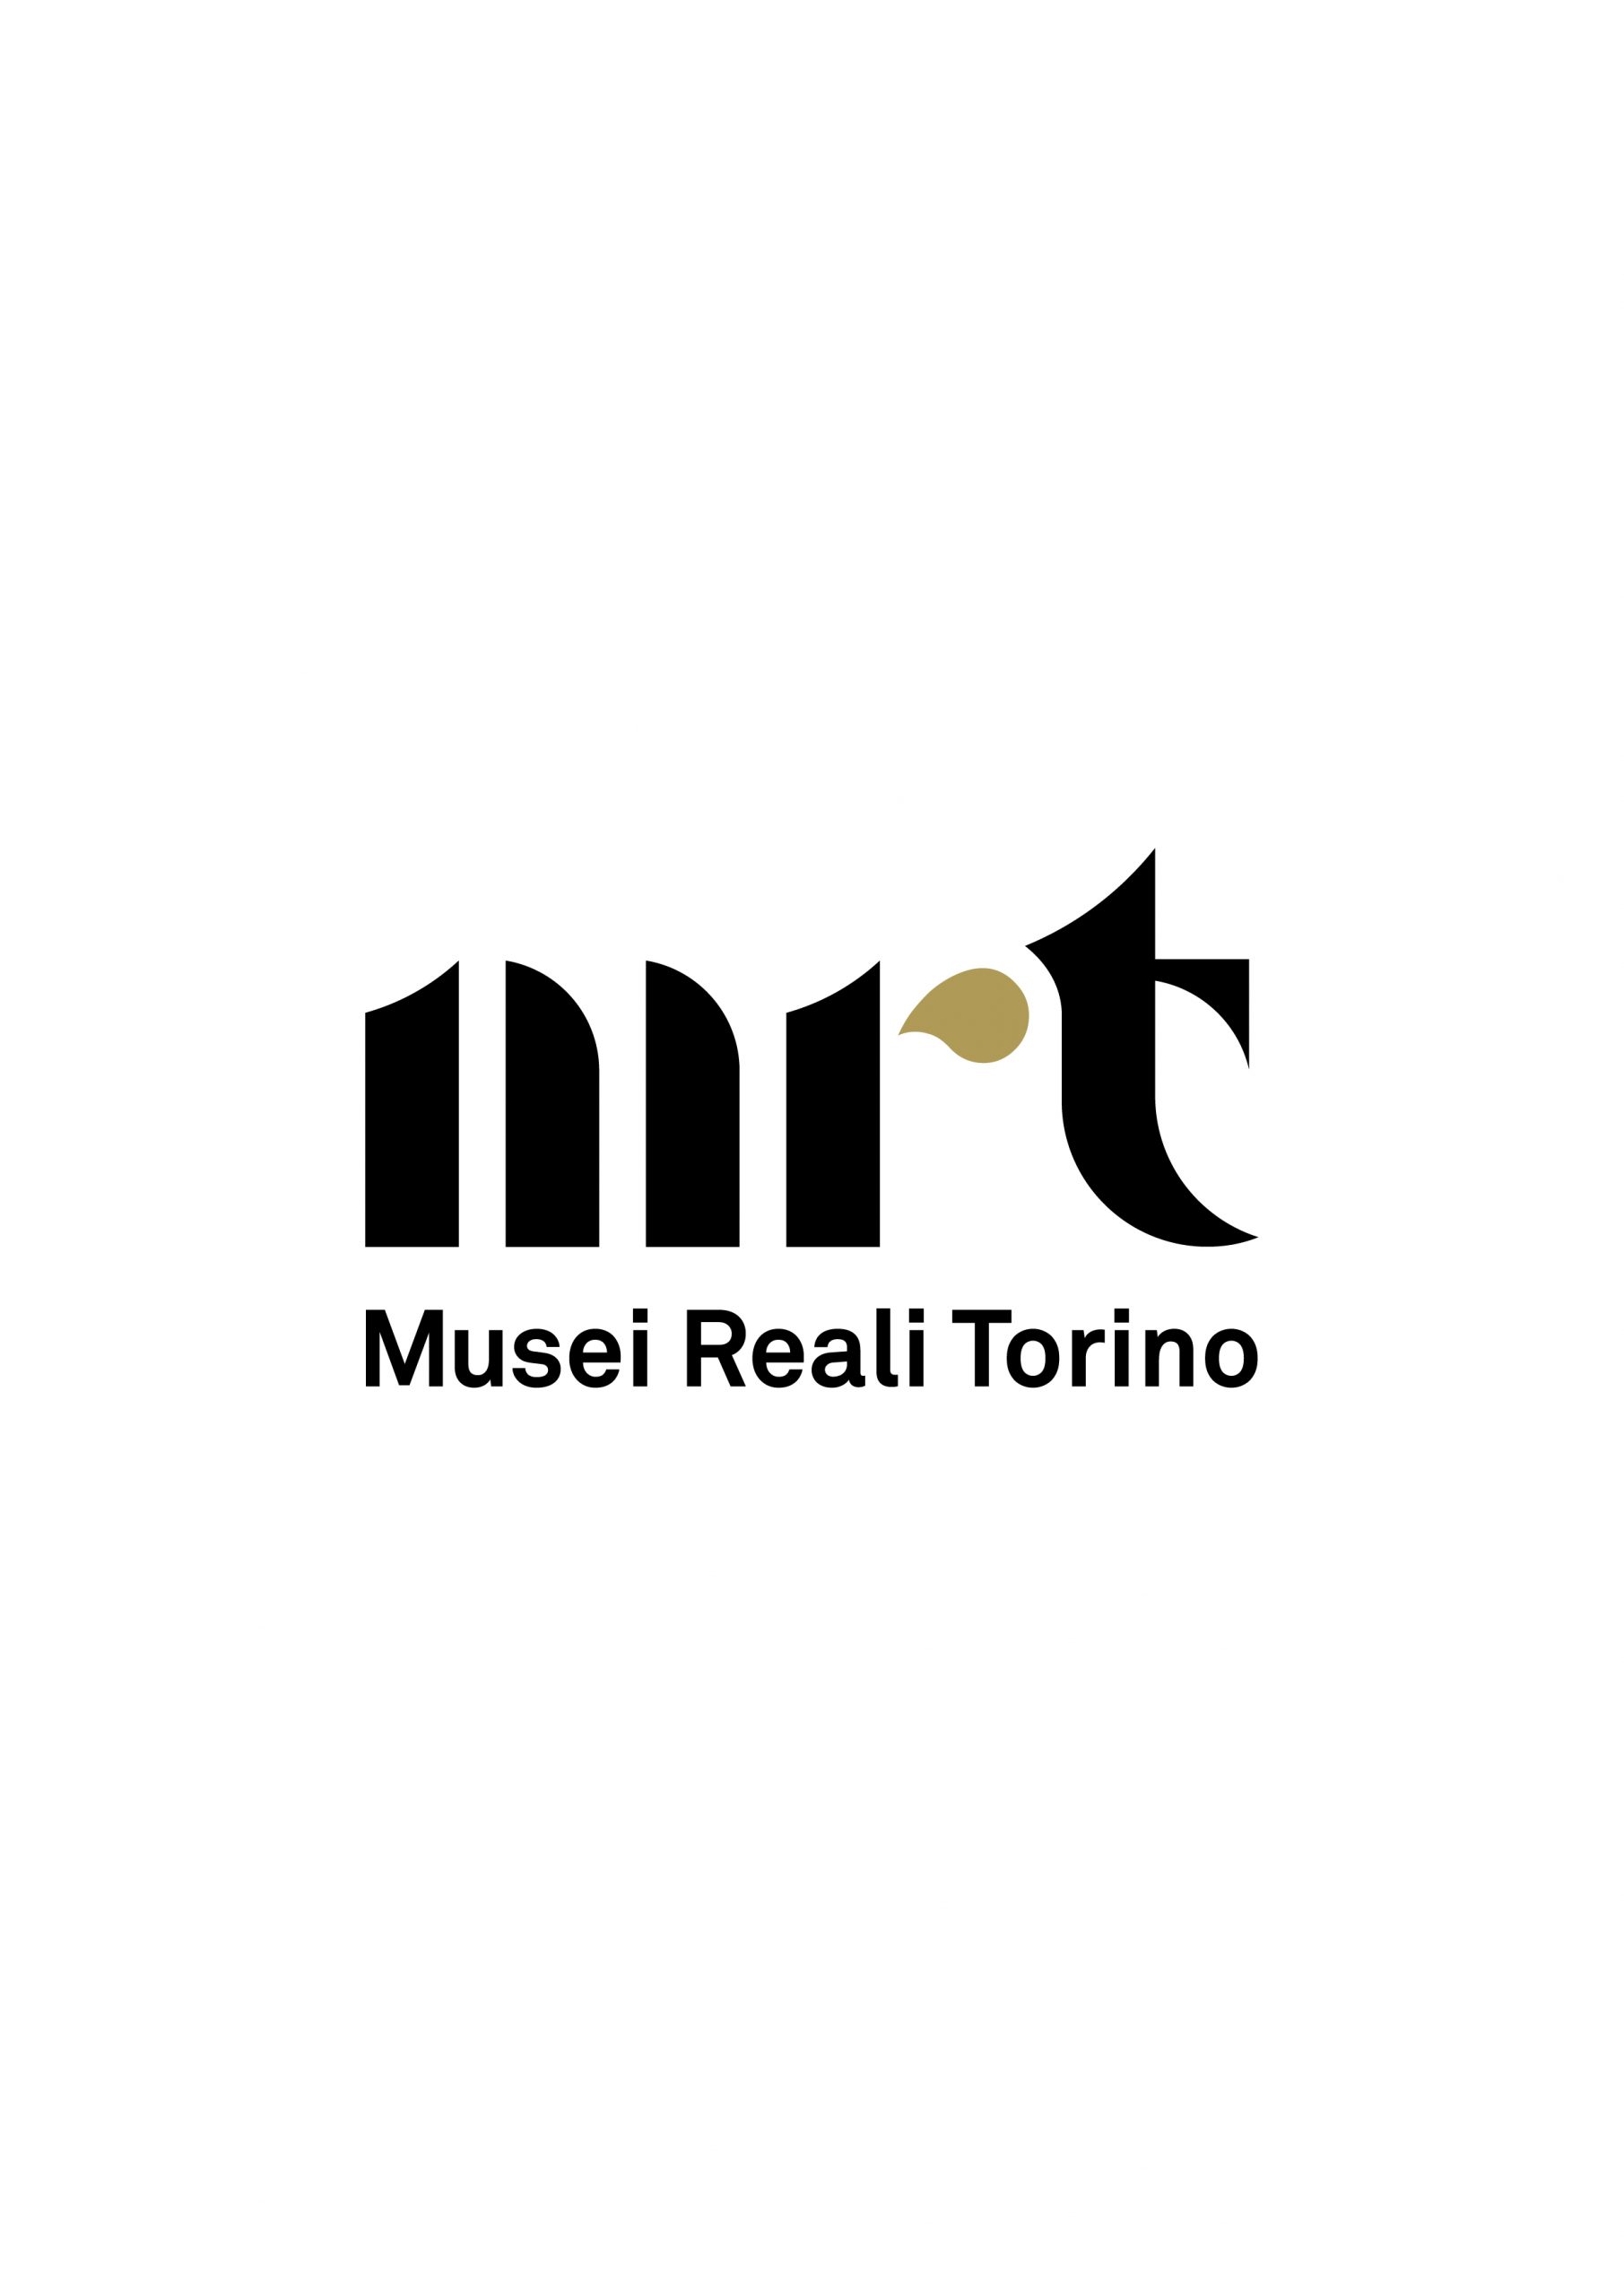 INTESTA CREATES THE REBRANDING AND NEW IDENTITY FOR THE ROYAL MUSEUMS OF TURIN.